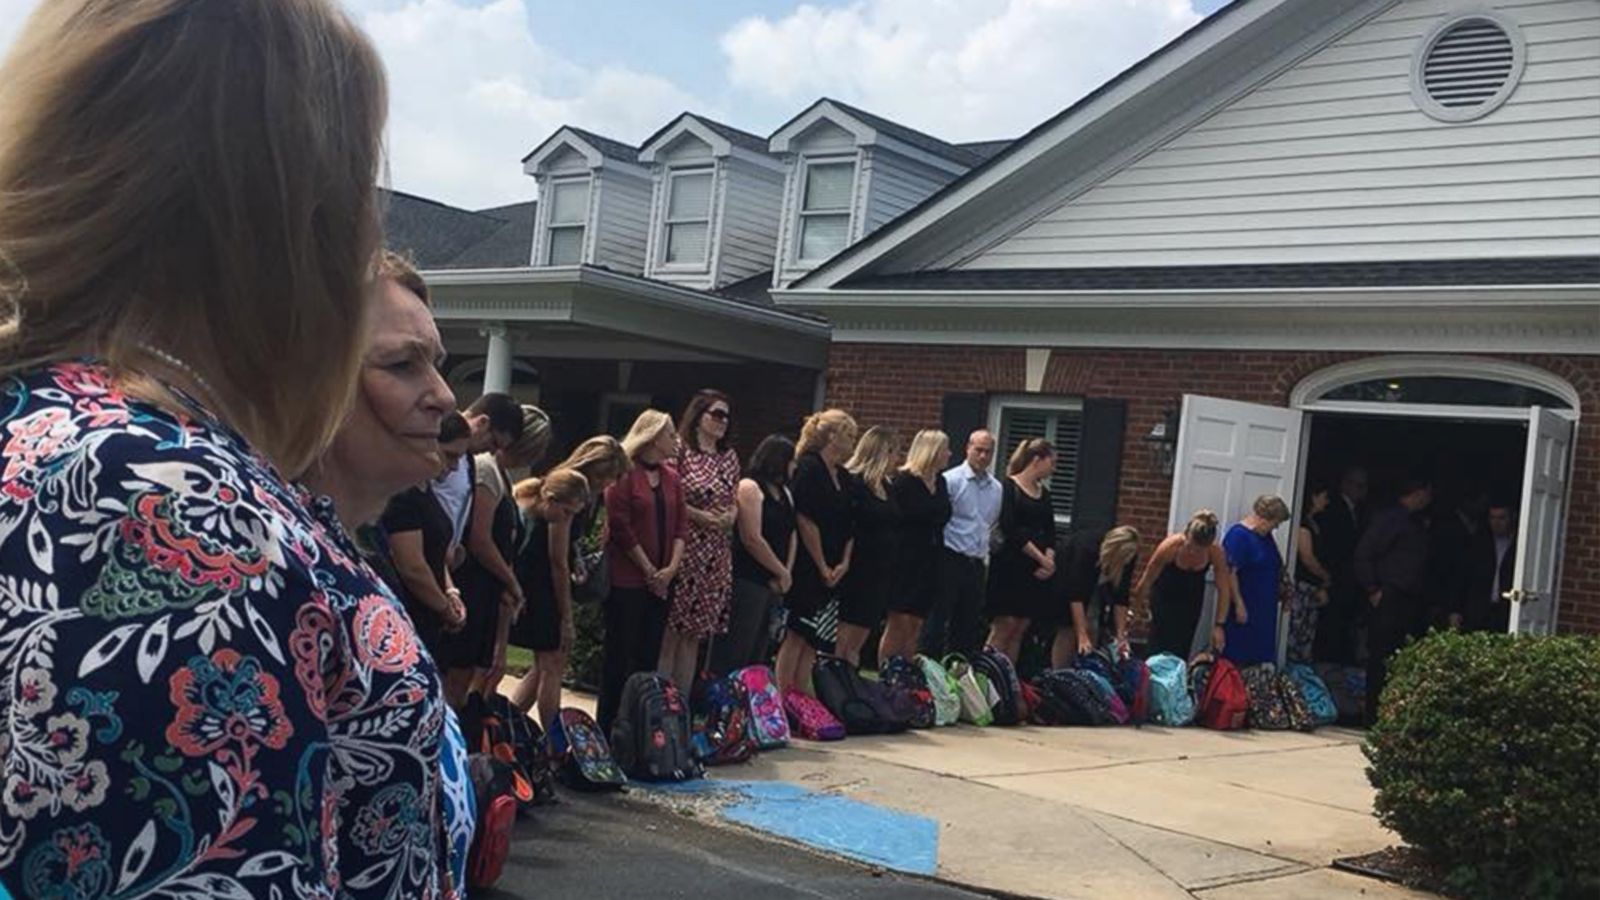 VIDEO: Teacher's last wish for backpacks at funeral inspires thousands